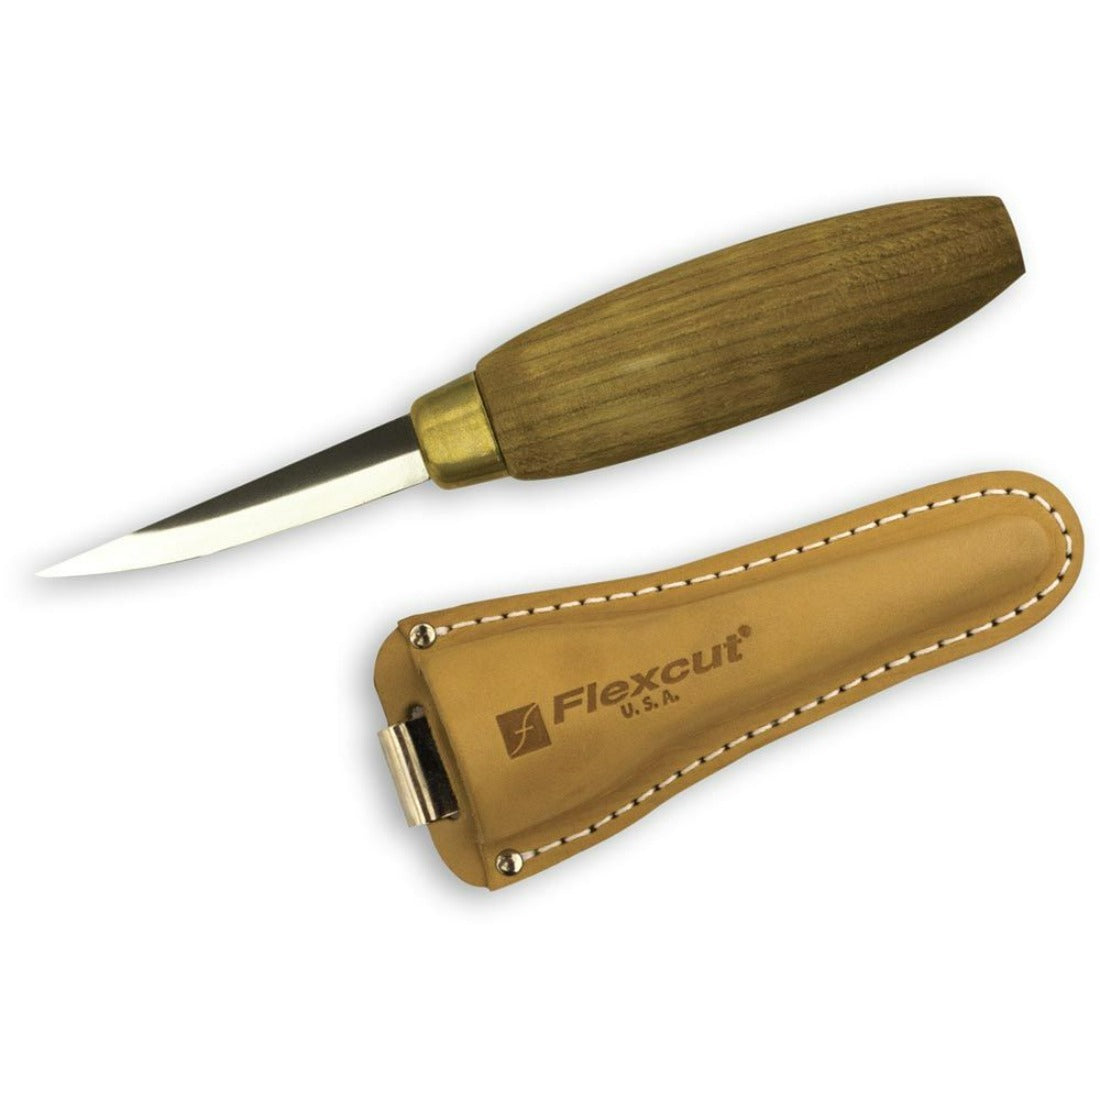 picture showing the Flexcut Sloyd KN50 knife with wooden handle and brass knurl between the handle and blade. Also in image is the leather sheath